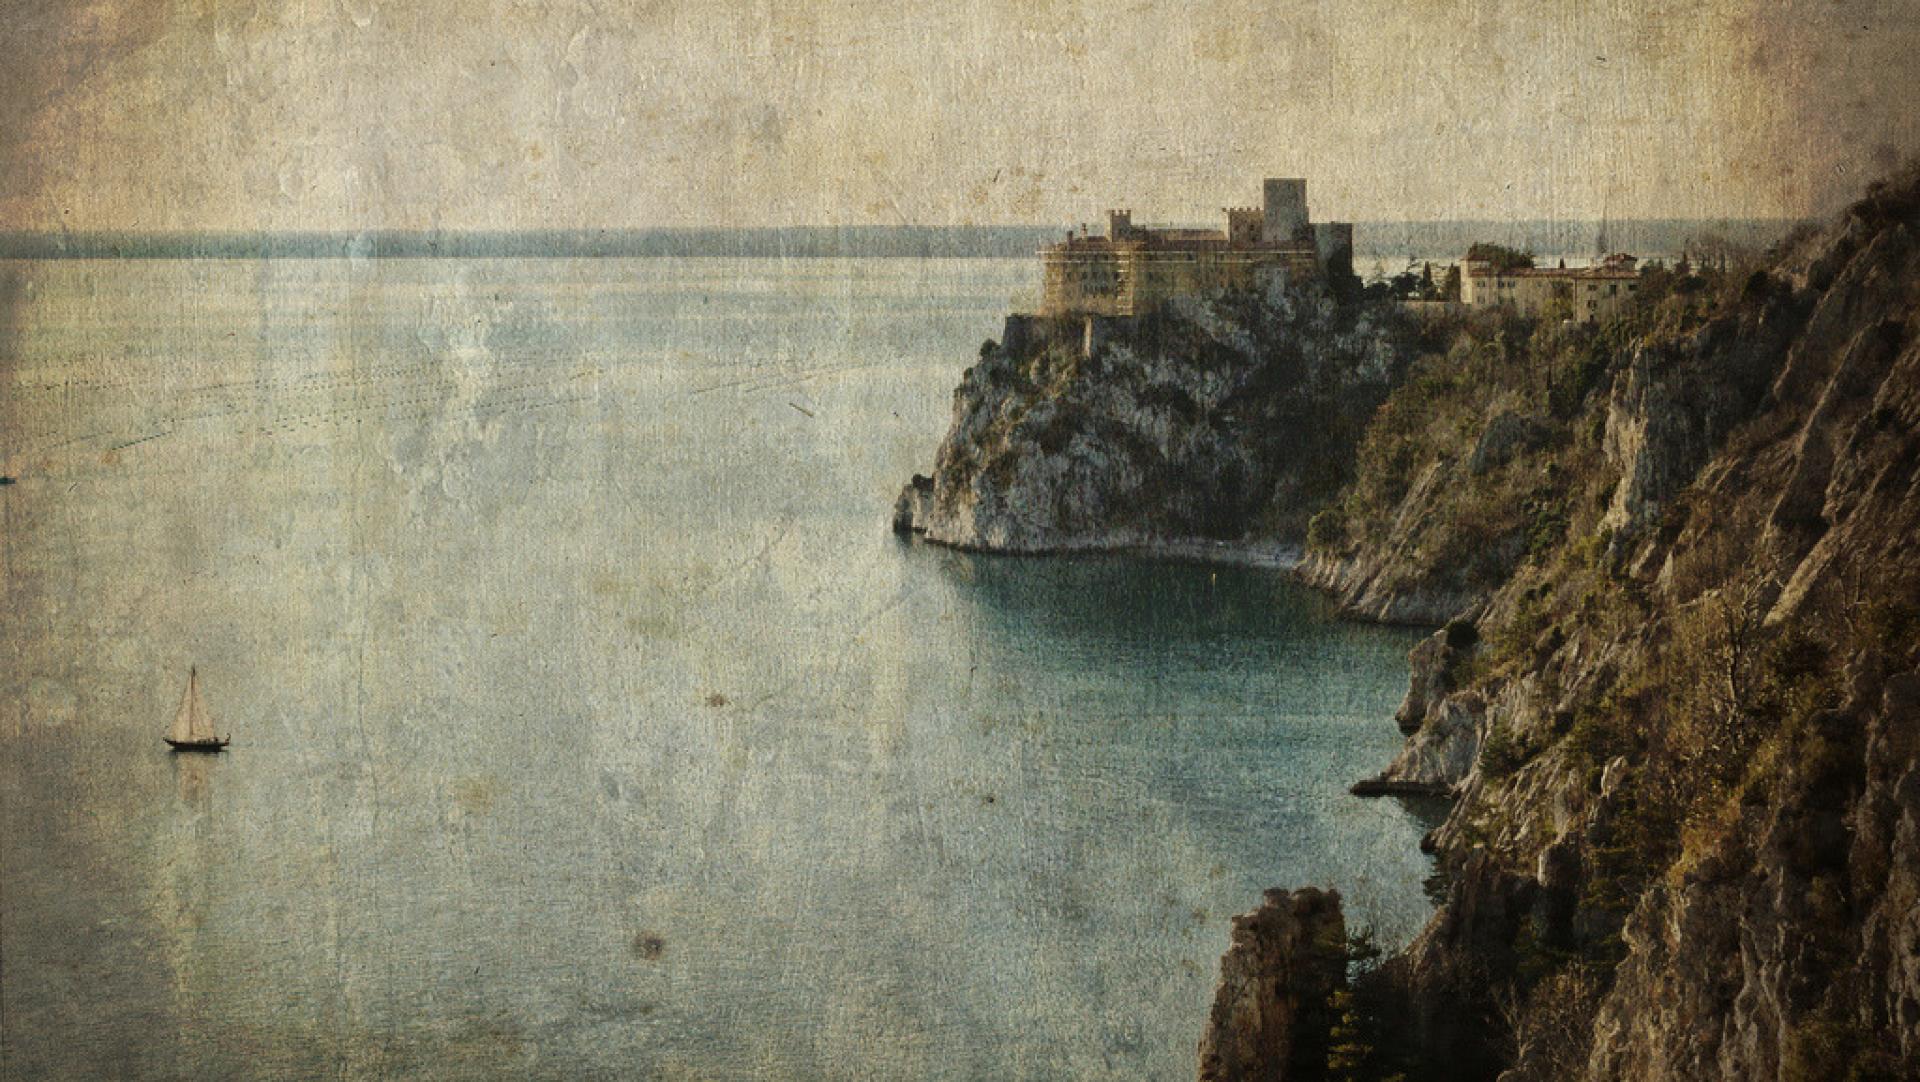 View at the Castle of Duino from Rilke’s trail. | Photo via Flickr